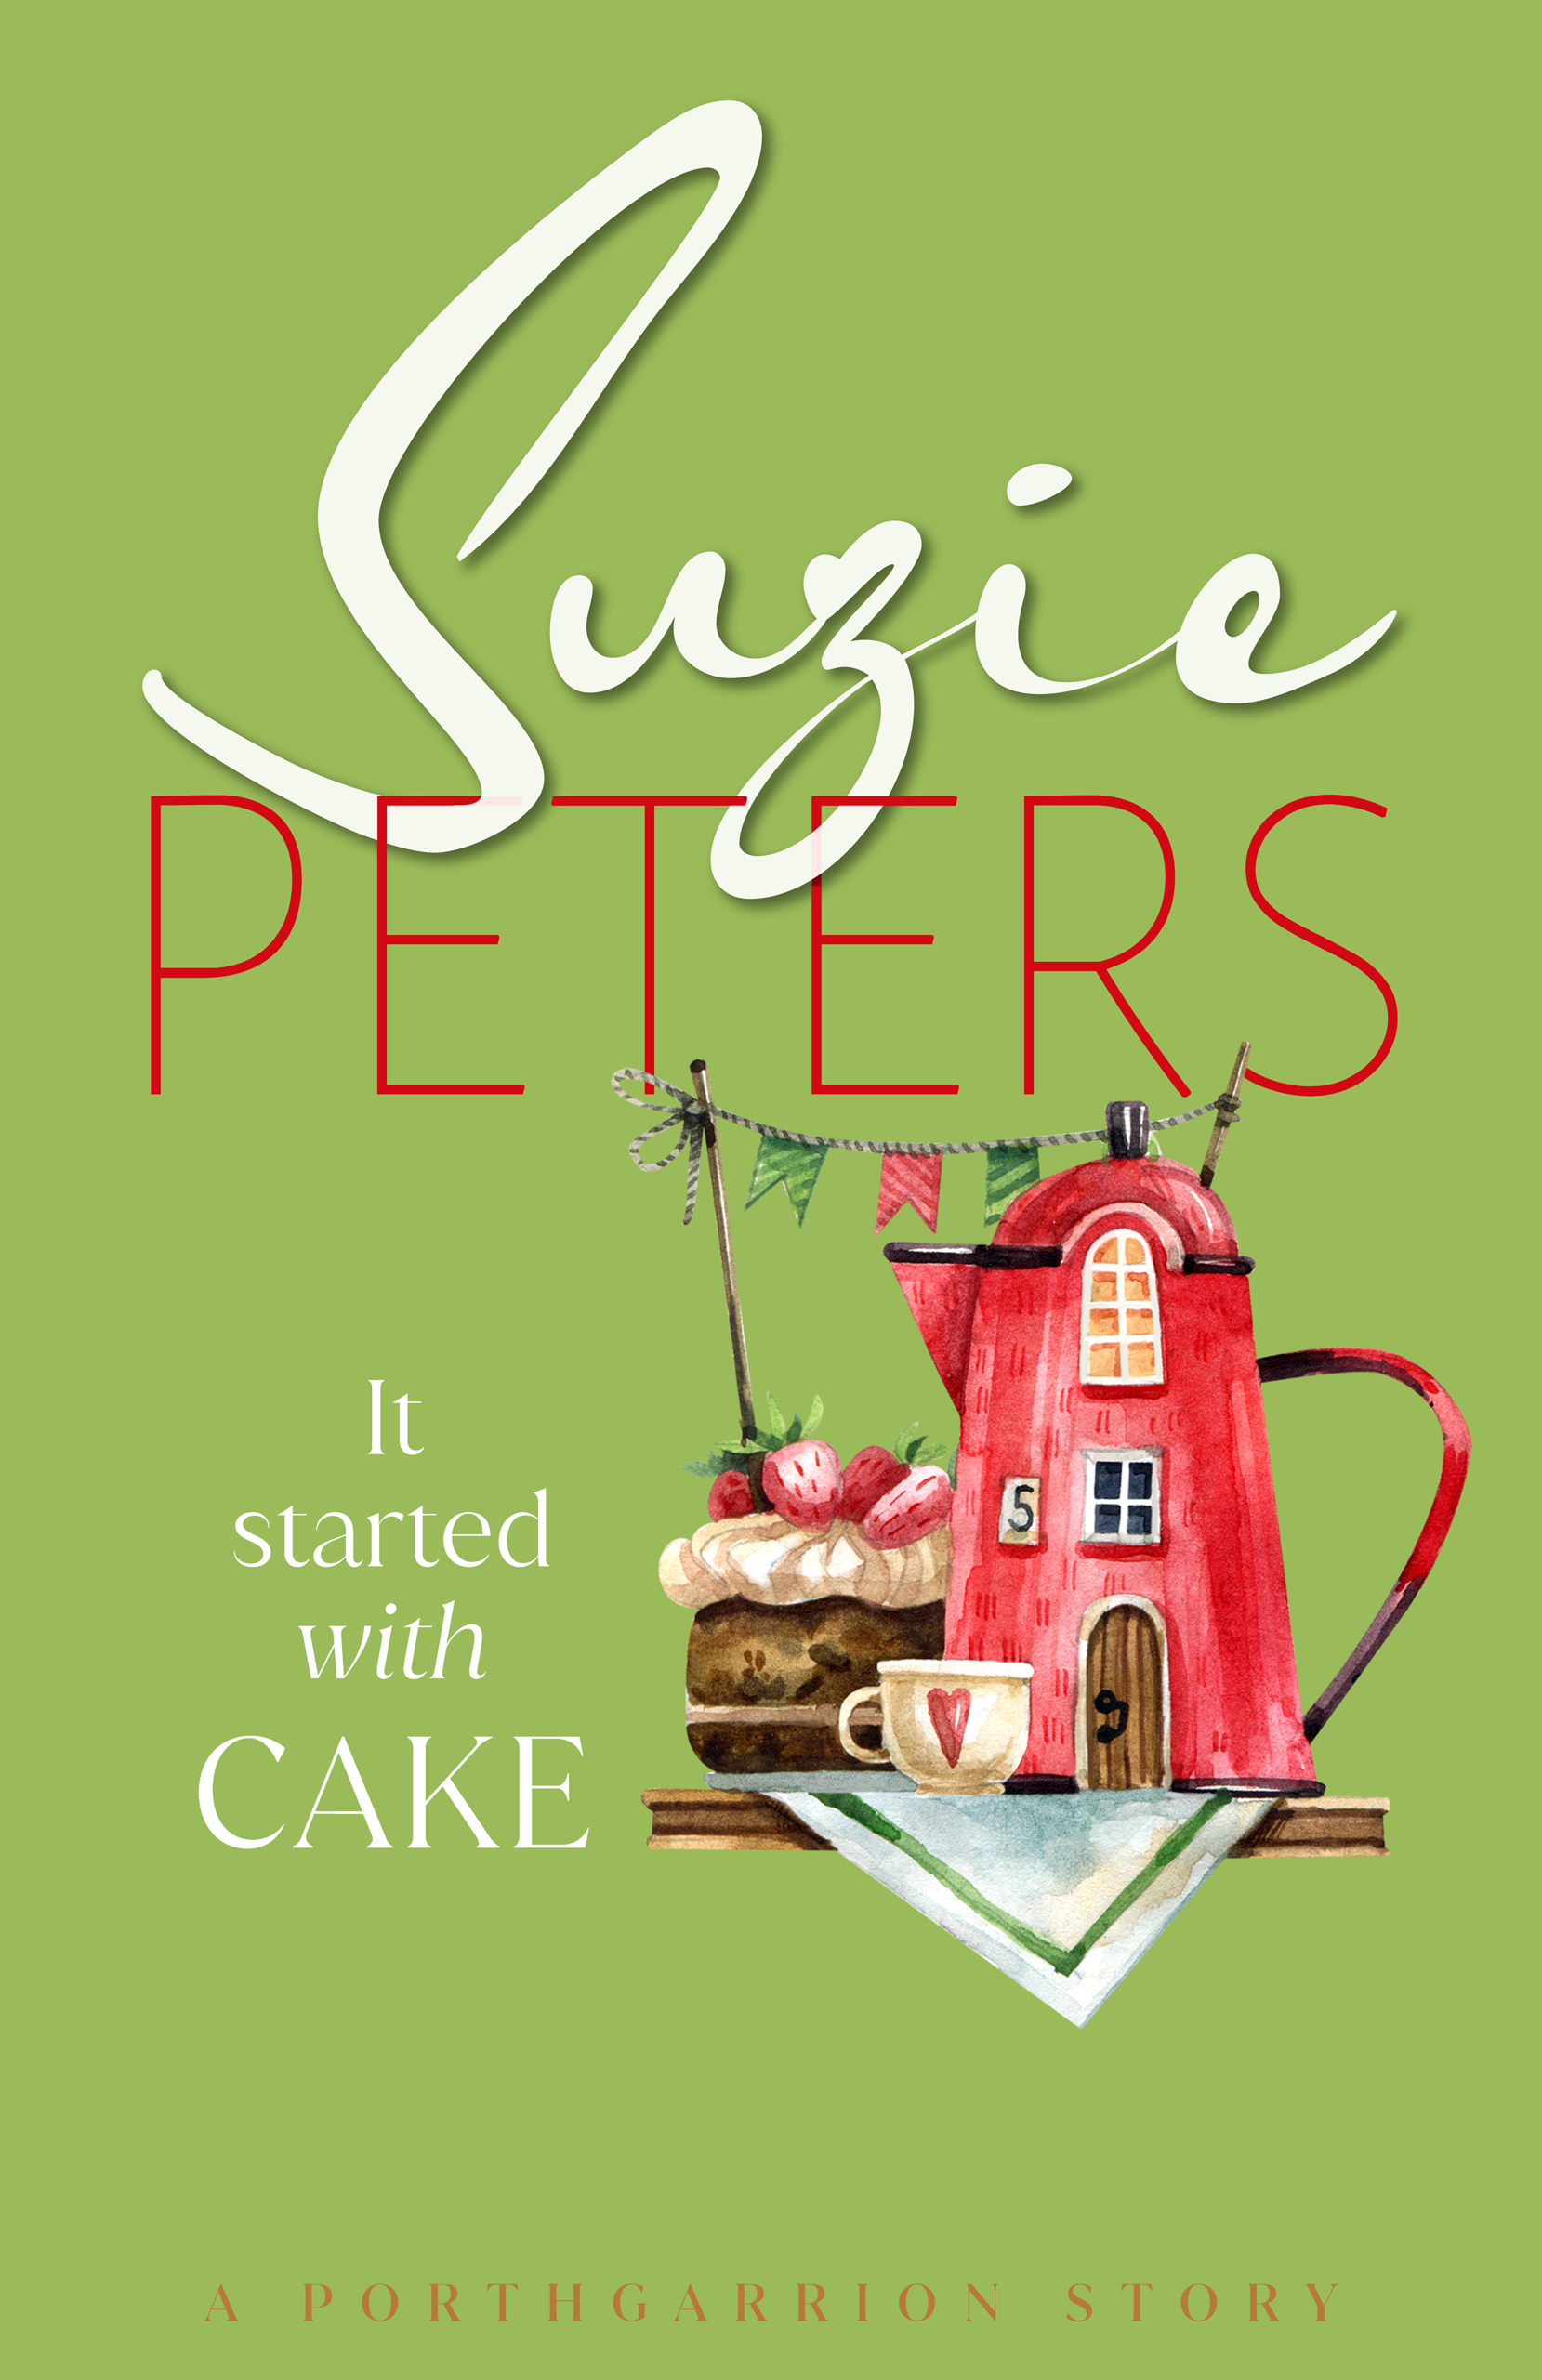 Porthgarrion Series: It Started with Cake by Suzie Peters.